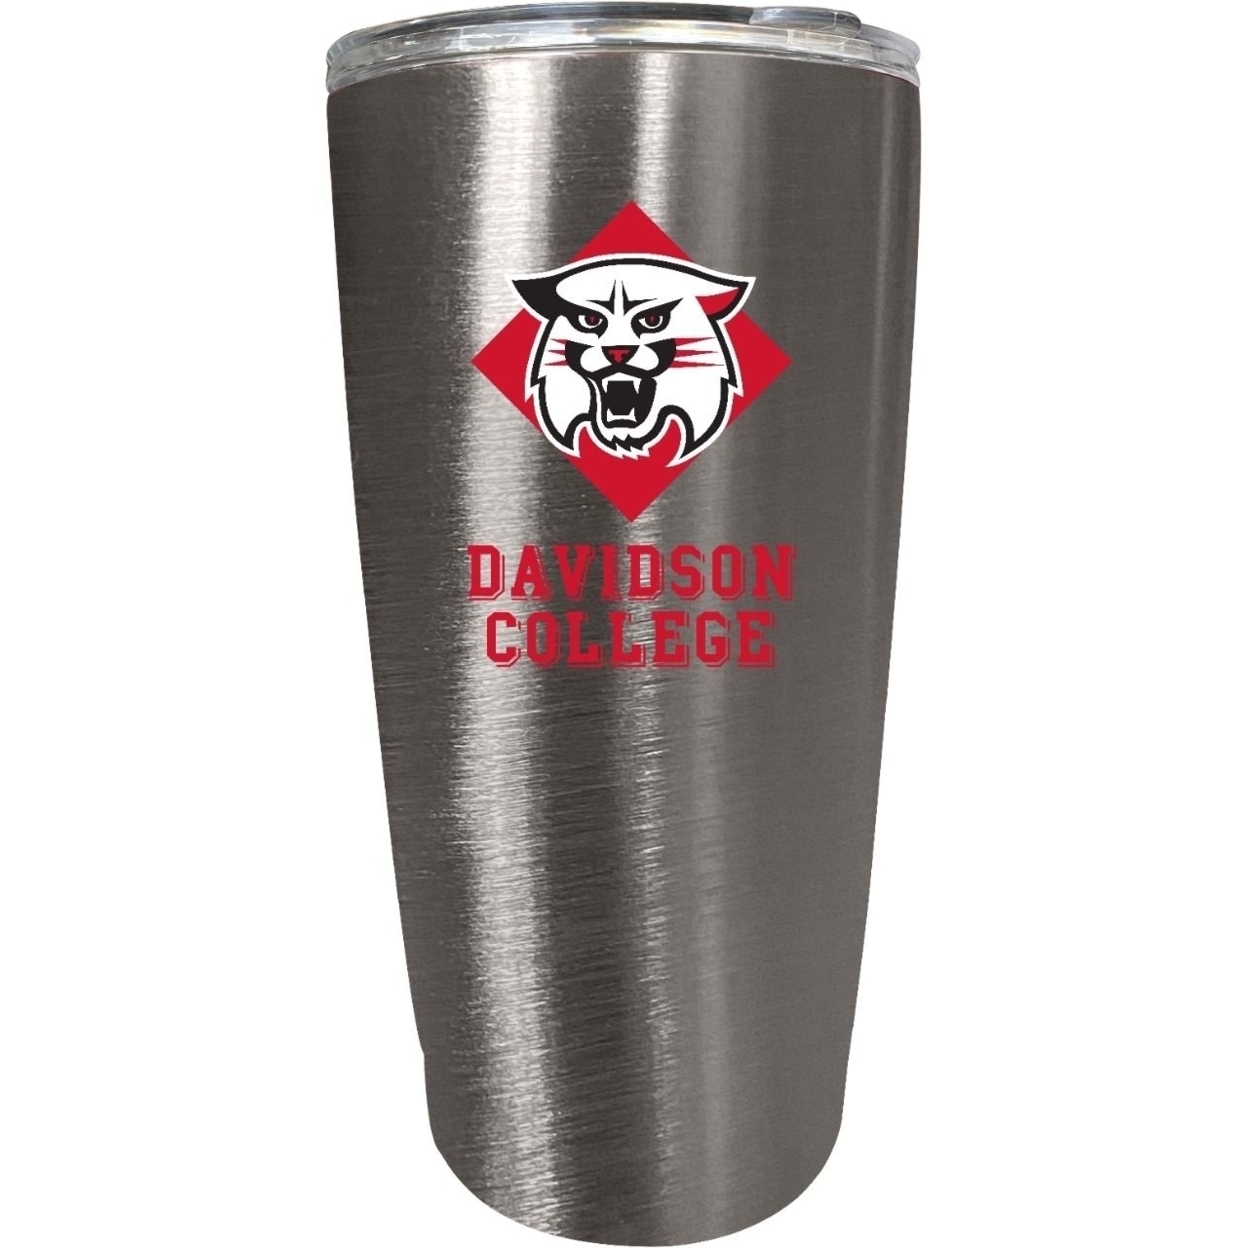 Davidson College 16 Oz Insulated Stainless Steel Tumbler Colorless